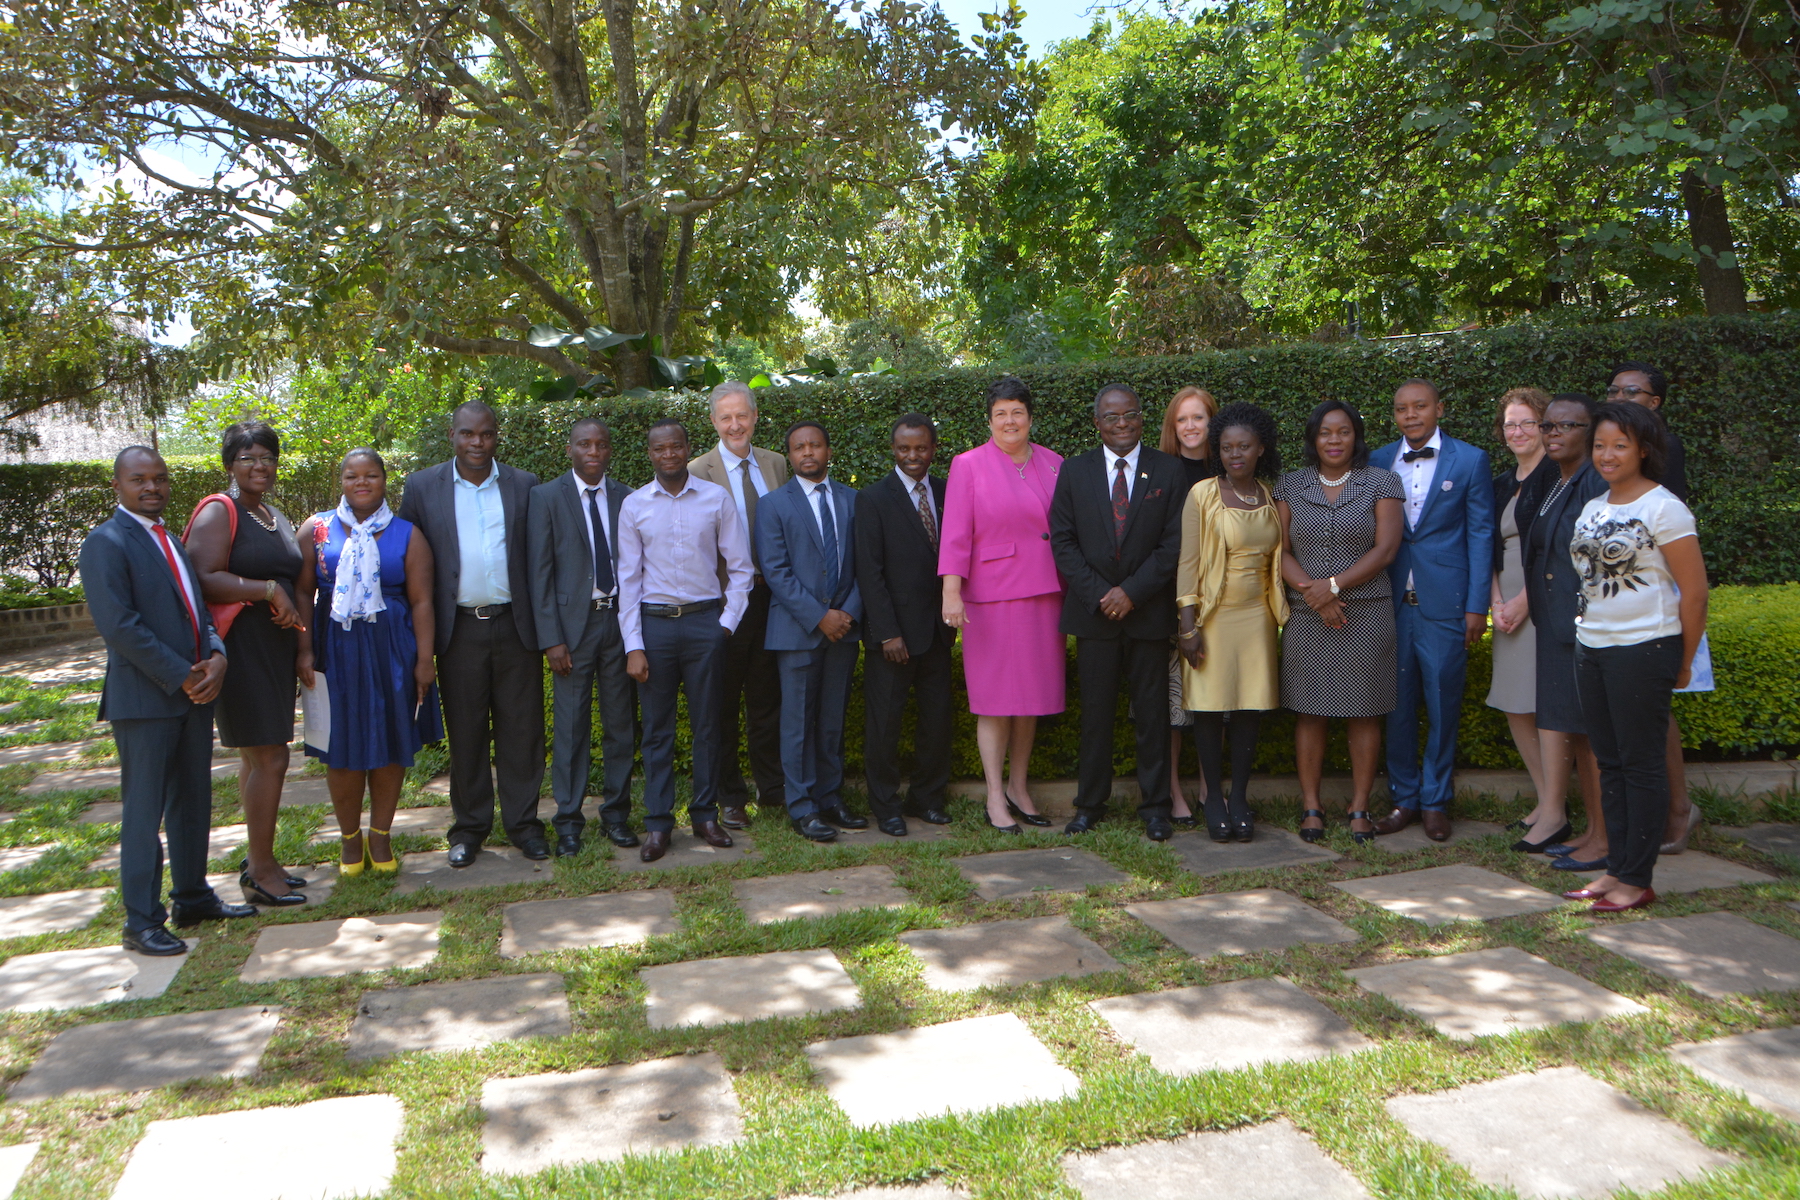 US Ambassador with graduates, teachers, and personnel from Tufts, LUANAR, and Malawi College of Medicine.